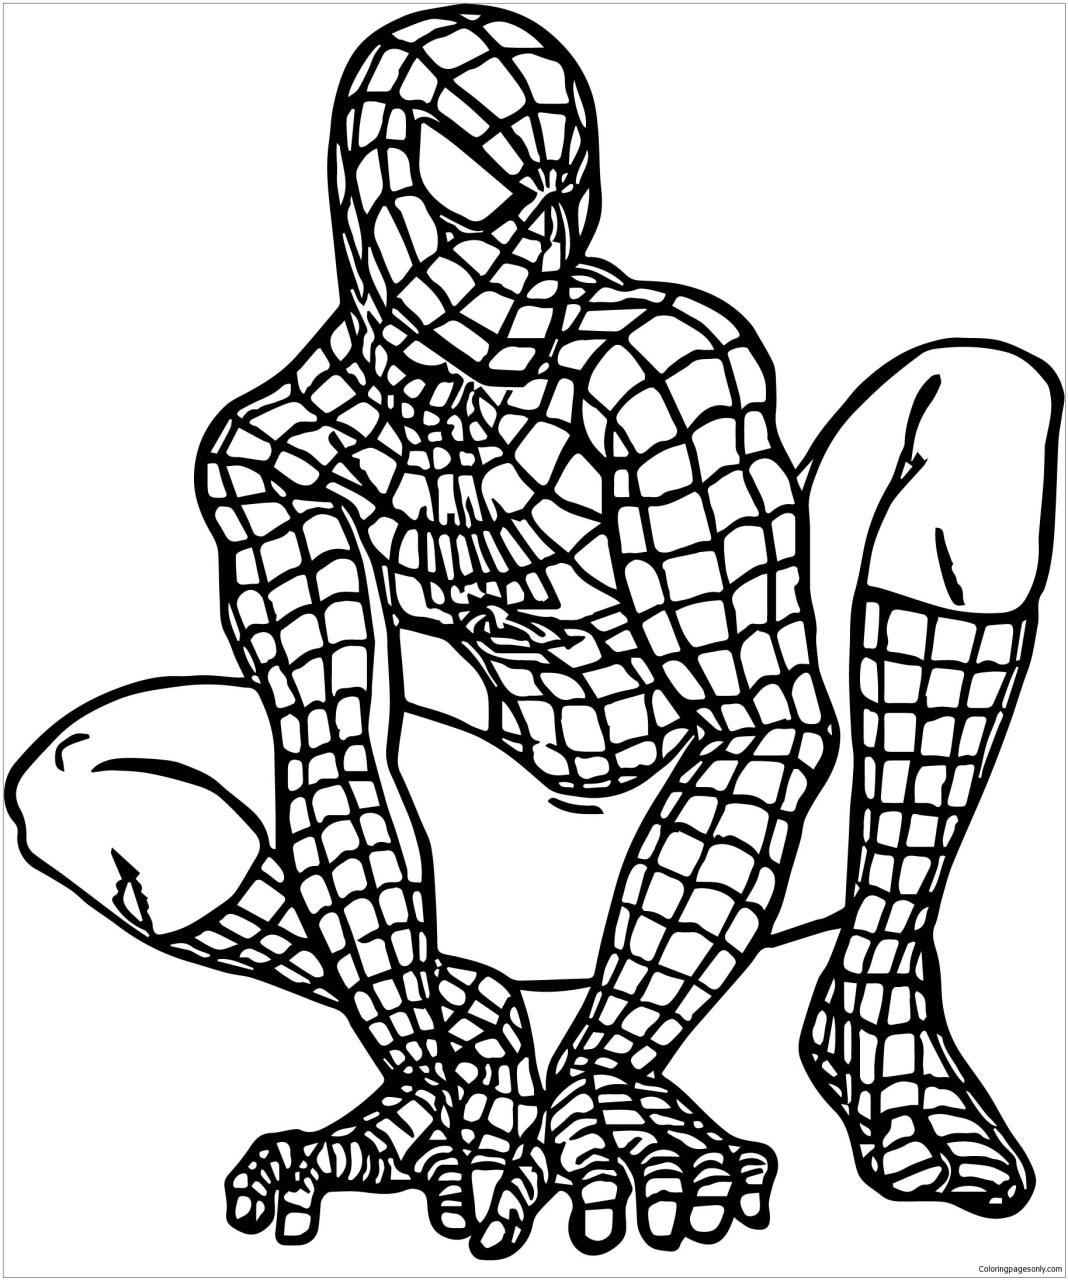 Waiting Spider Man Coloring Page Free Coloring Pages Online